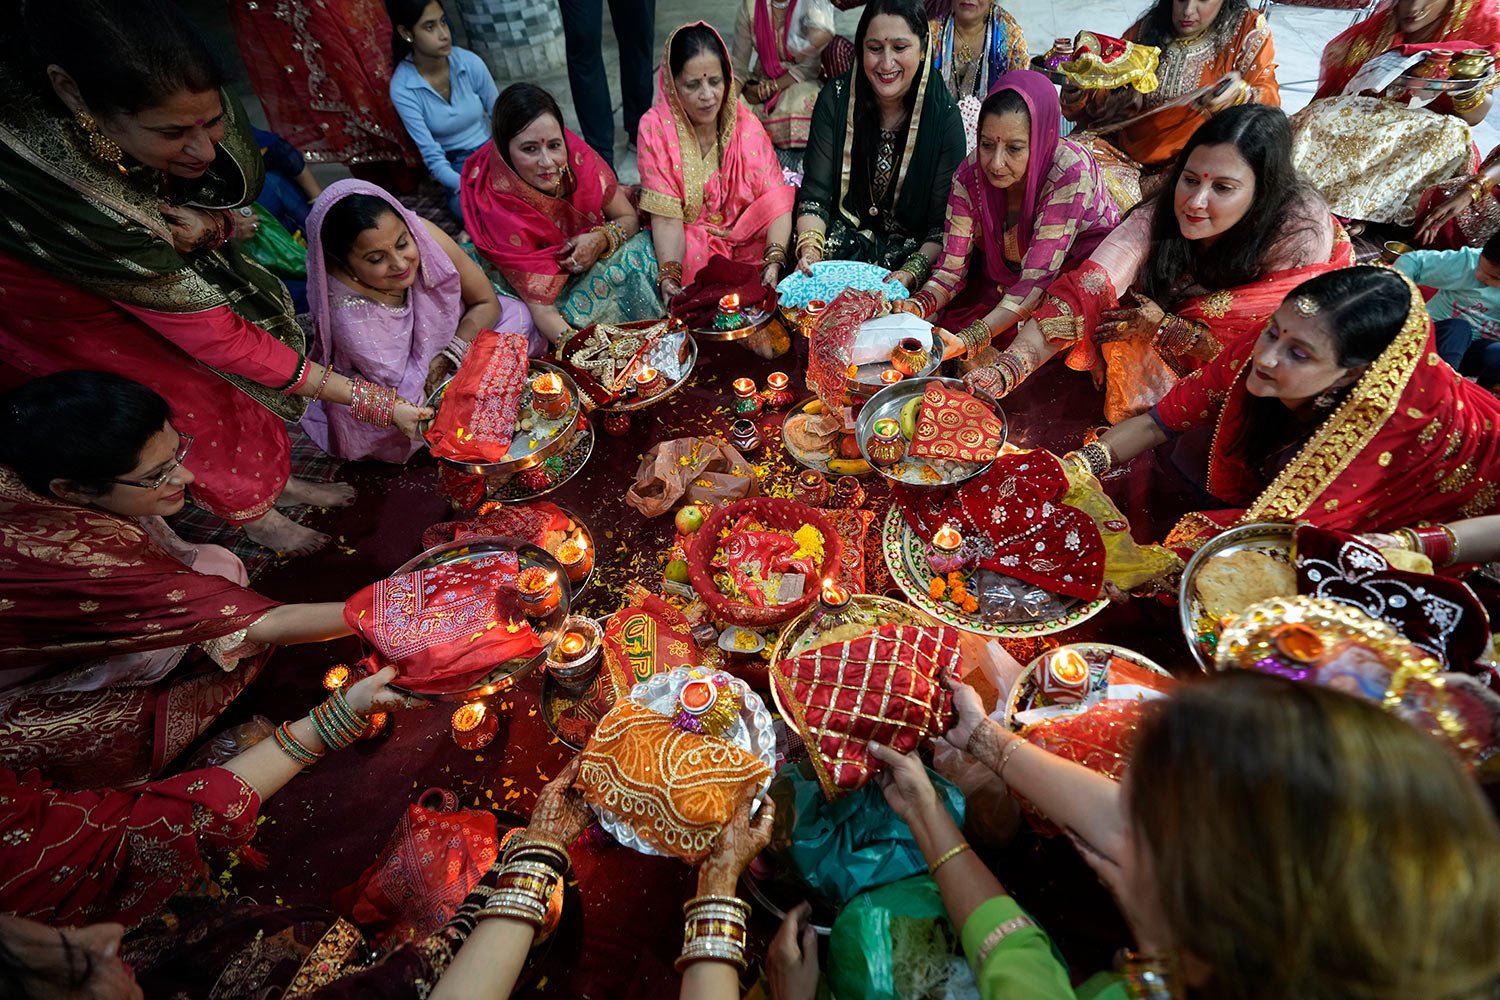  Married Hindu women perform rituals to pray for the longevity and well-being of their husbands during Karva Chauth festival in Jammu, India, Thursday, Nov. 1, 2023. (AP Photo/Channi Anand) 